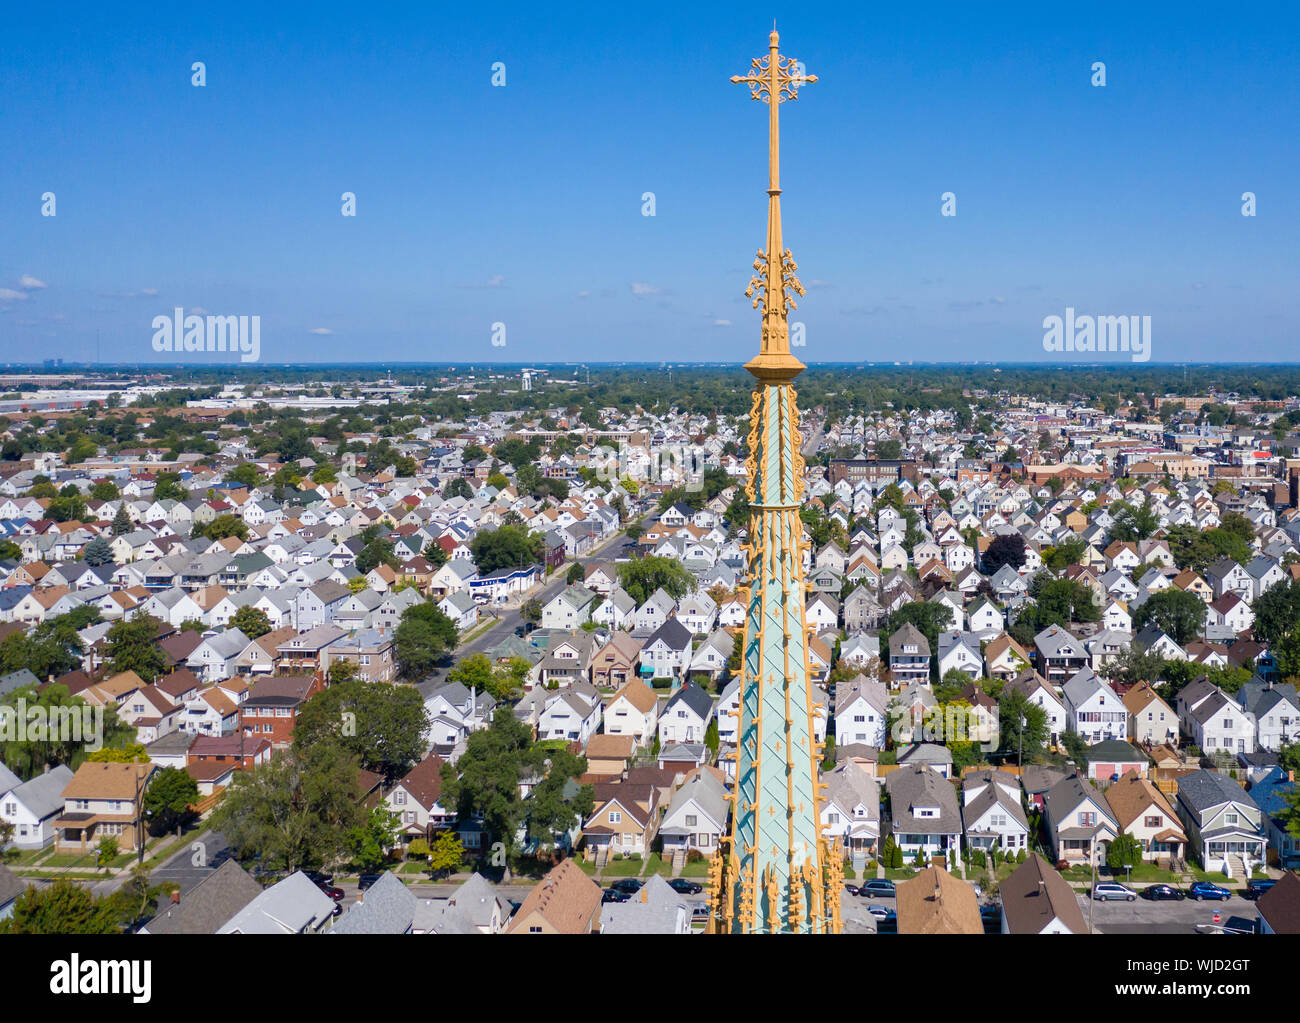 Hamtramck, Michigan - The spire of St Florian Catholic Church rises nearly 200 feet above Hamtramck. The church was built in 1908 in the Polish Cathed Stock Photo